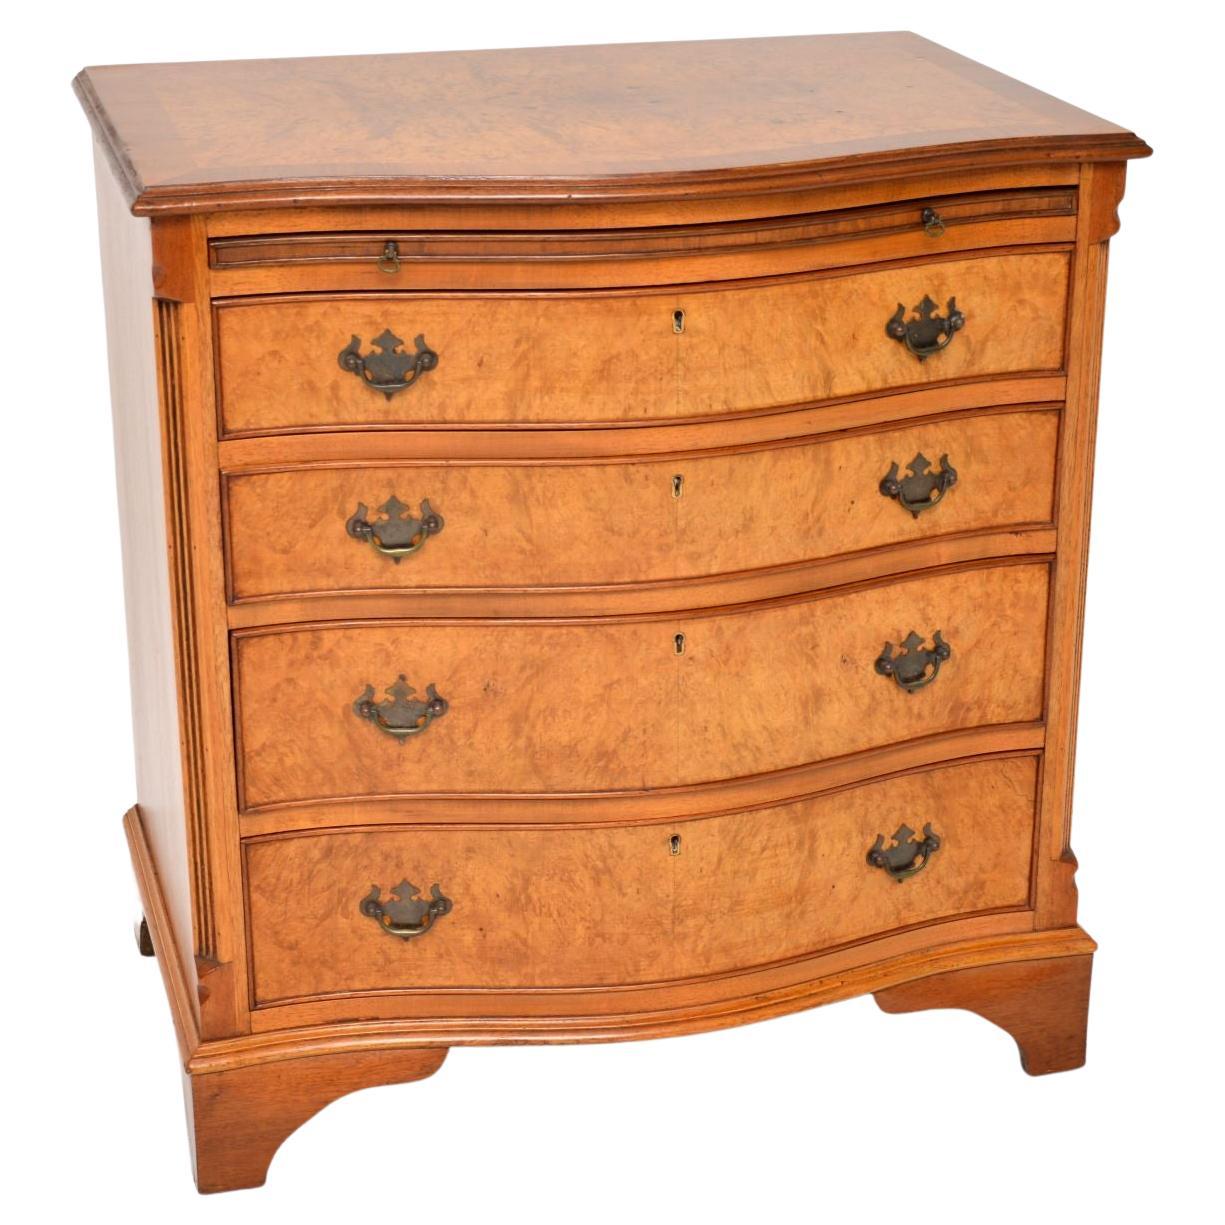  Antique Burr Walnut Chest of Drawers